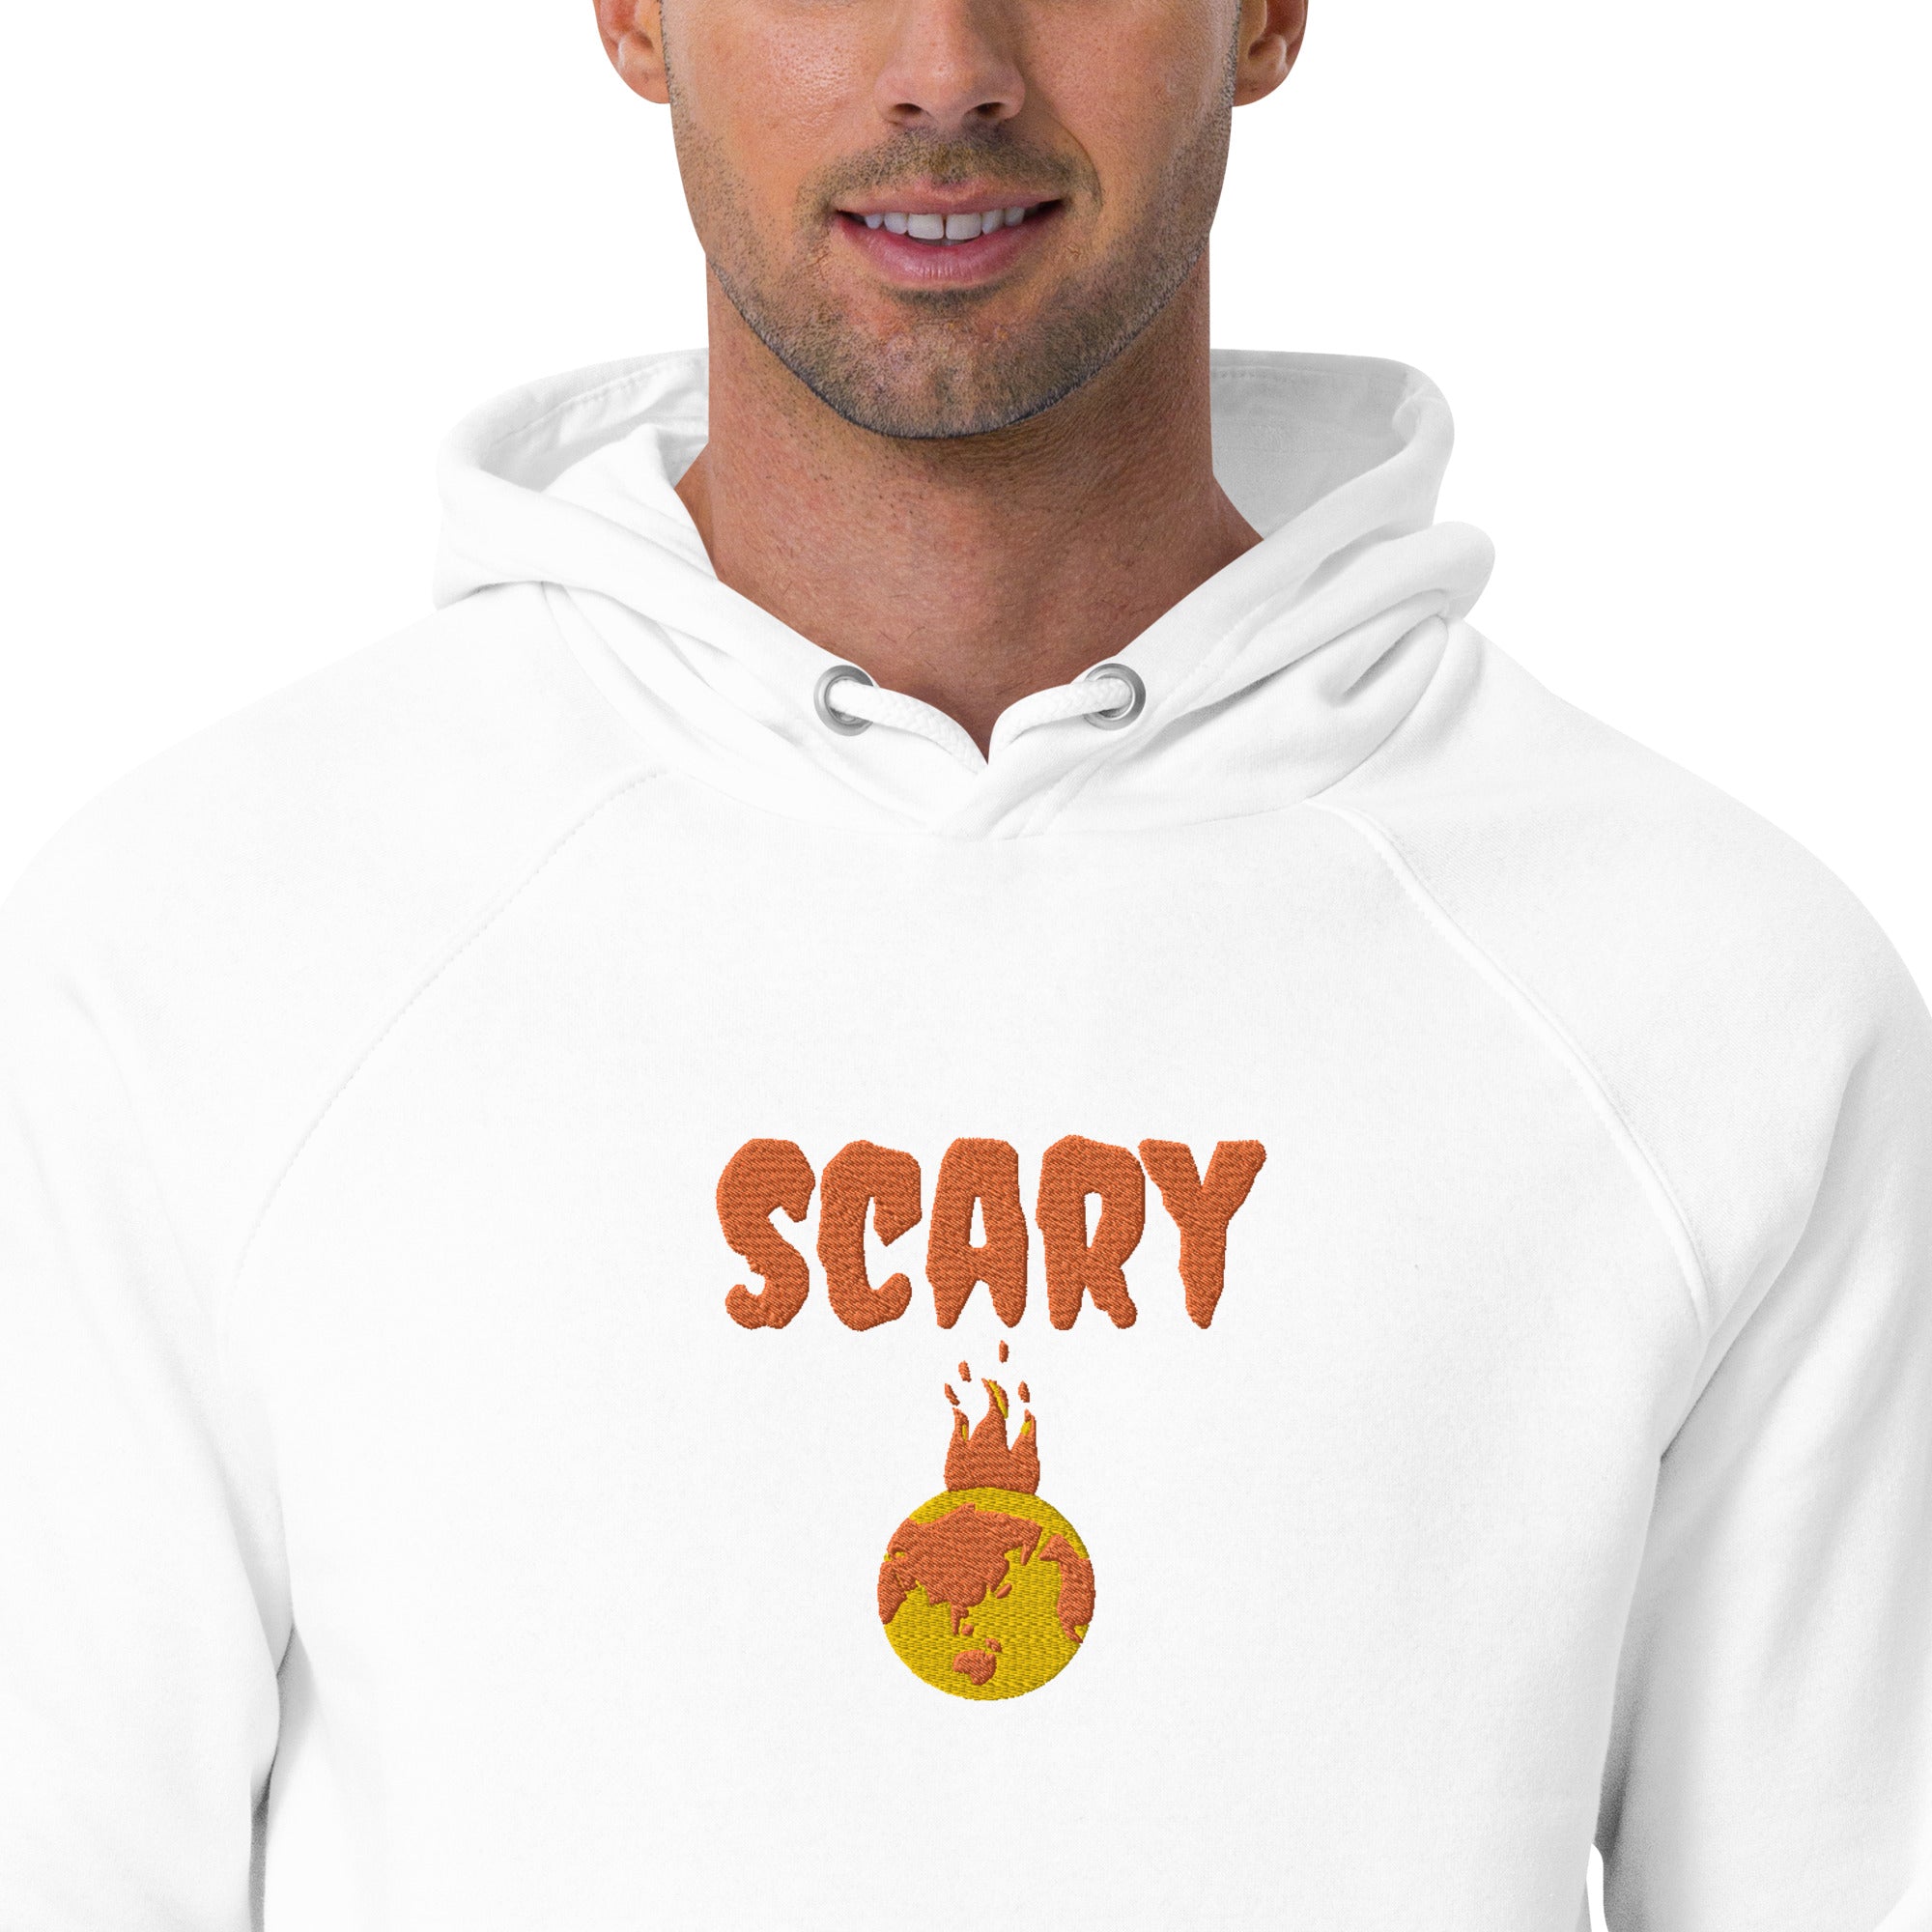 Halloween Embroidered Scary Warming Planet Unisex Eco Friendly Raglan Hoodie